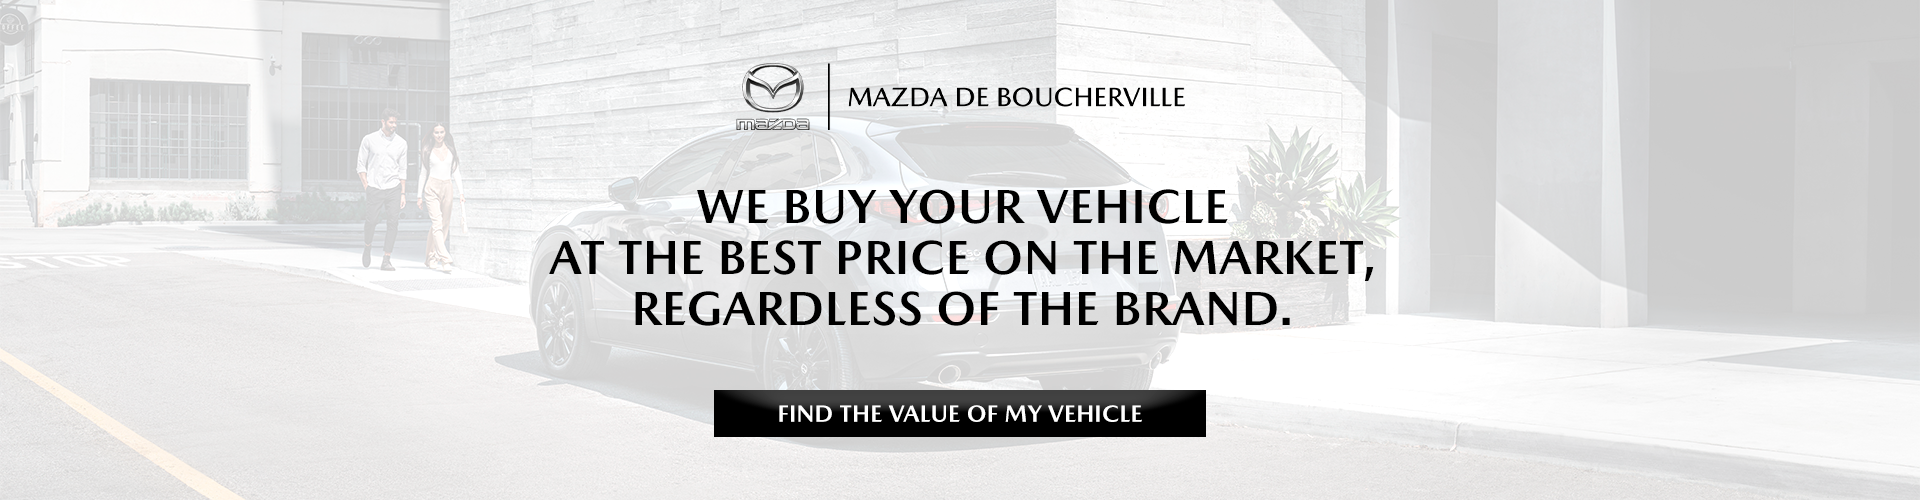 FIND THE VALUE OF YOUR VEHICLE